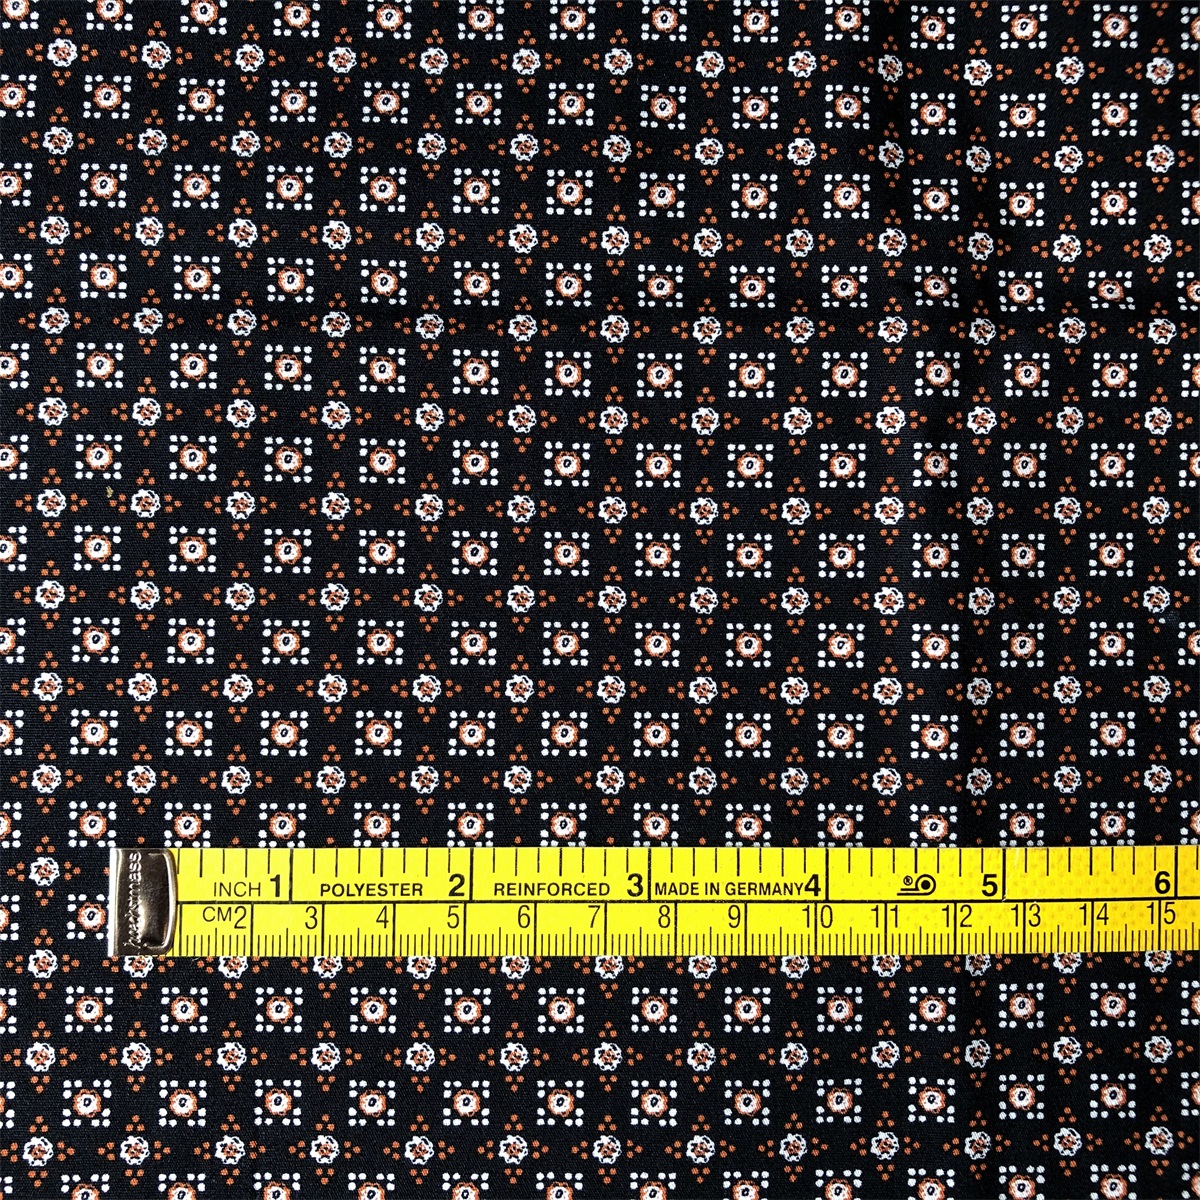 Sun-rising Textile Cotton fabric high quality Eco-friendly 100% cotton poplin printed woven fabric for men's shirts